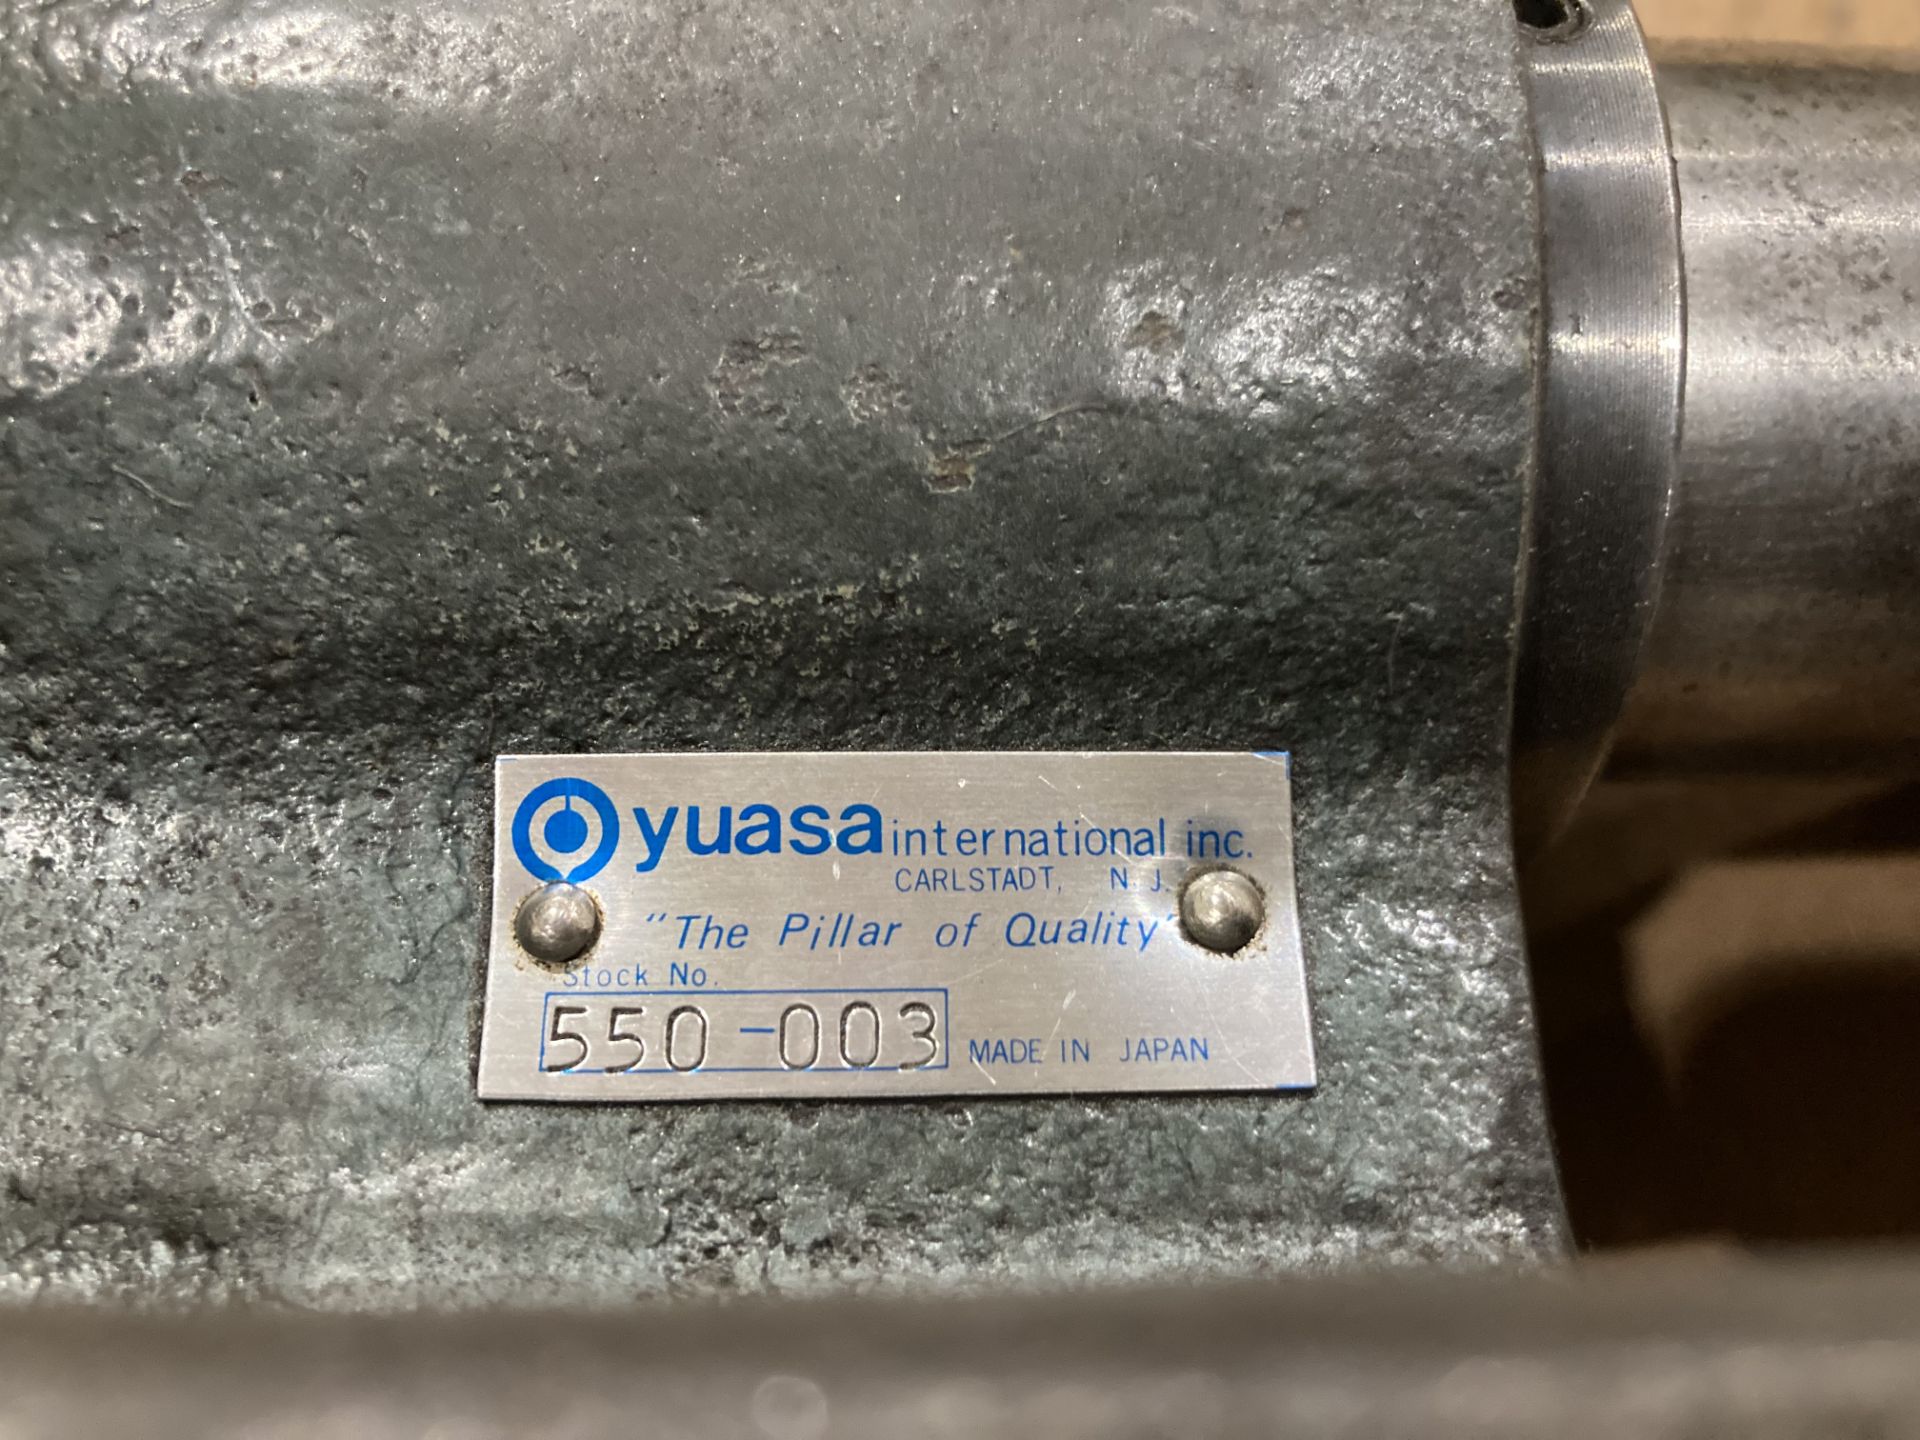 (2) Yuasa 5C Collet Indexers, M/N: 550-003 - Image 6 of 6